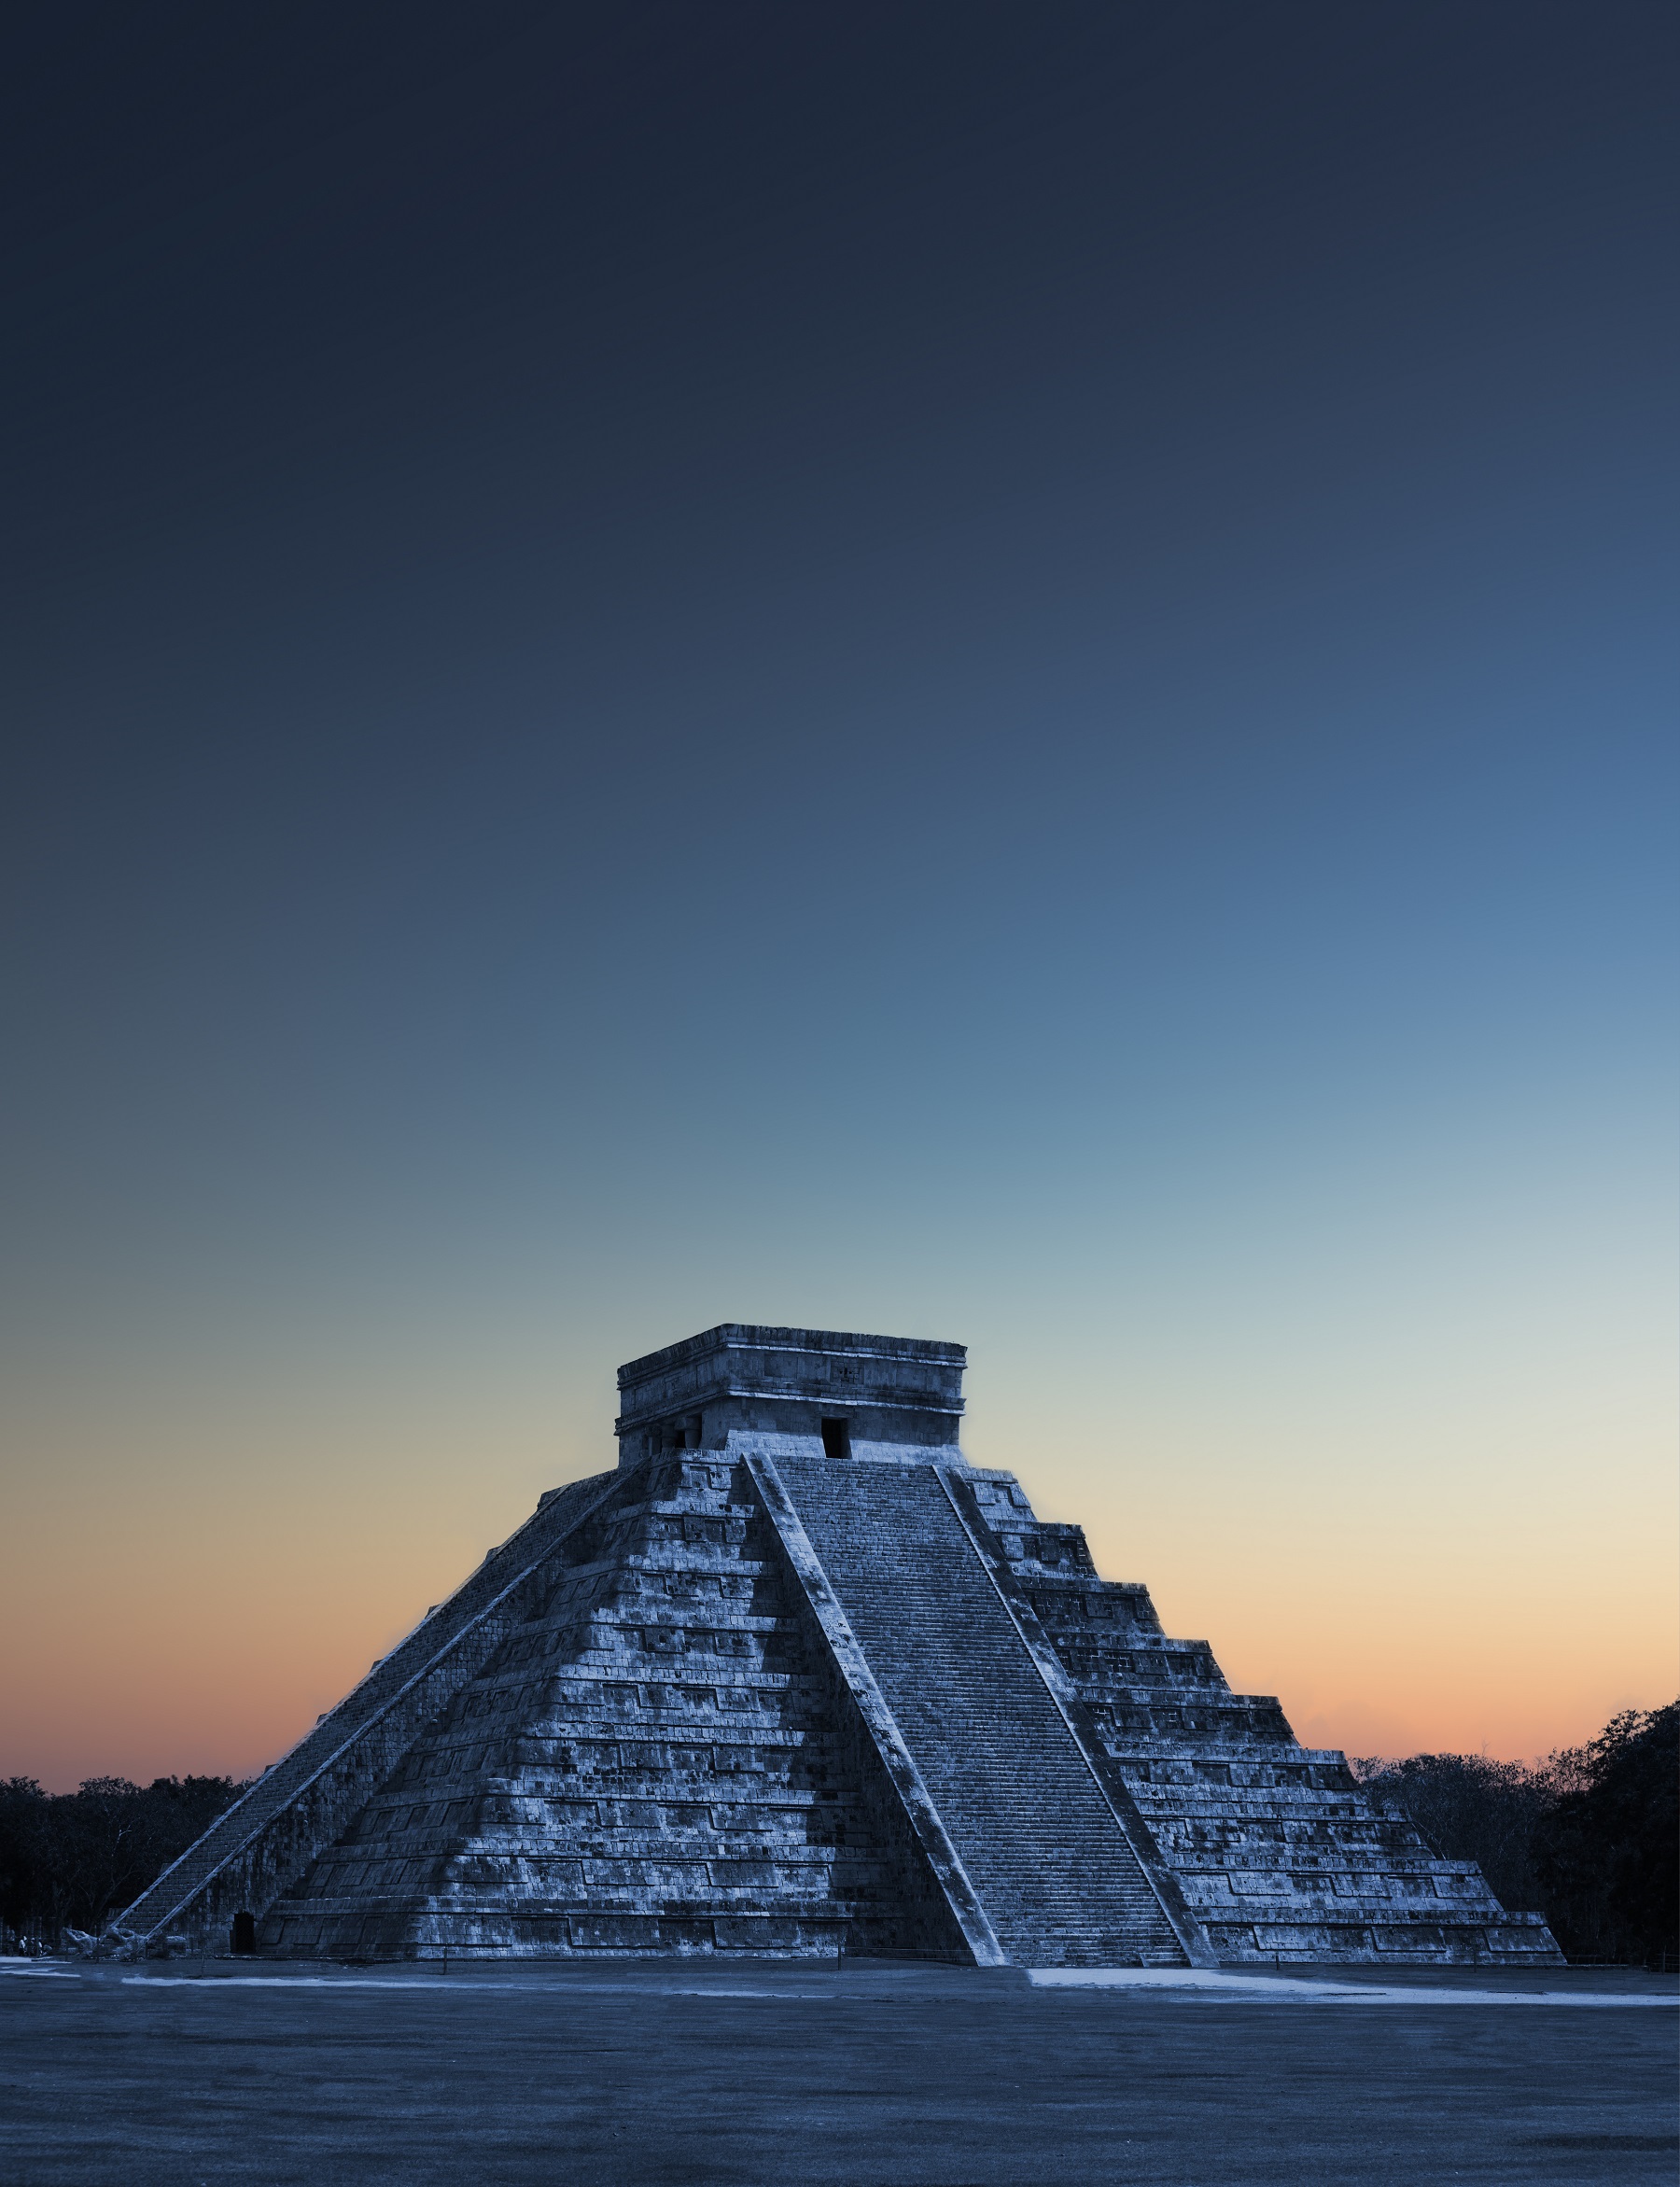 An image of the Step-Pyramid of El Castillo at Chichen Itza, the pyramid rises 79 feet (24 meters) above the main plaza. The pyramid has four sides, with 91 stairs each facing the cardinal directions. Shutterstock.